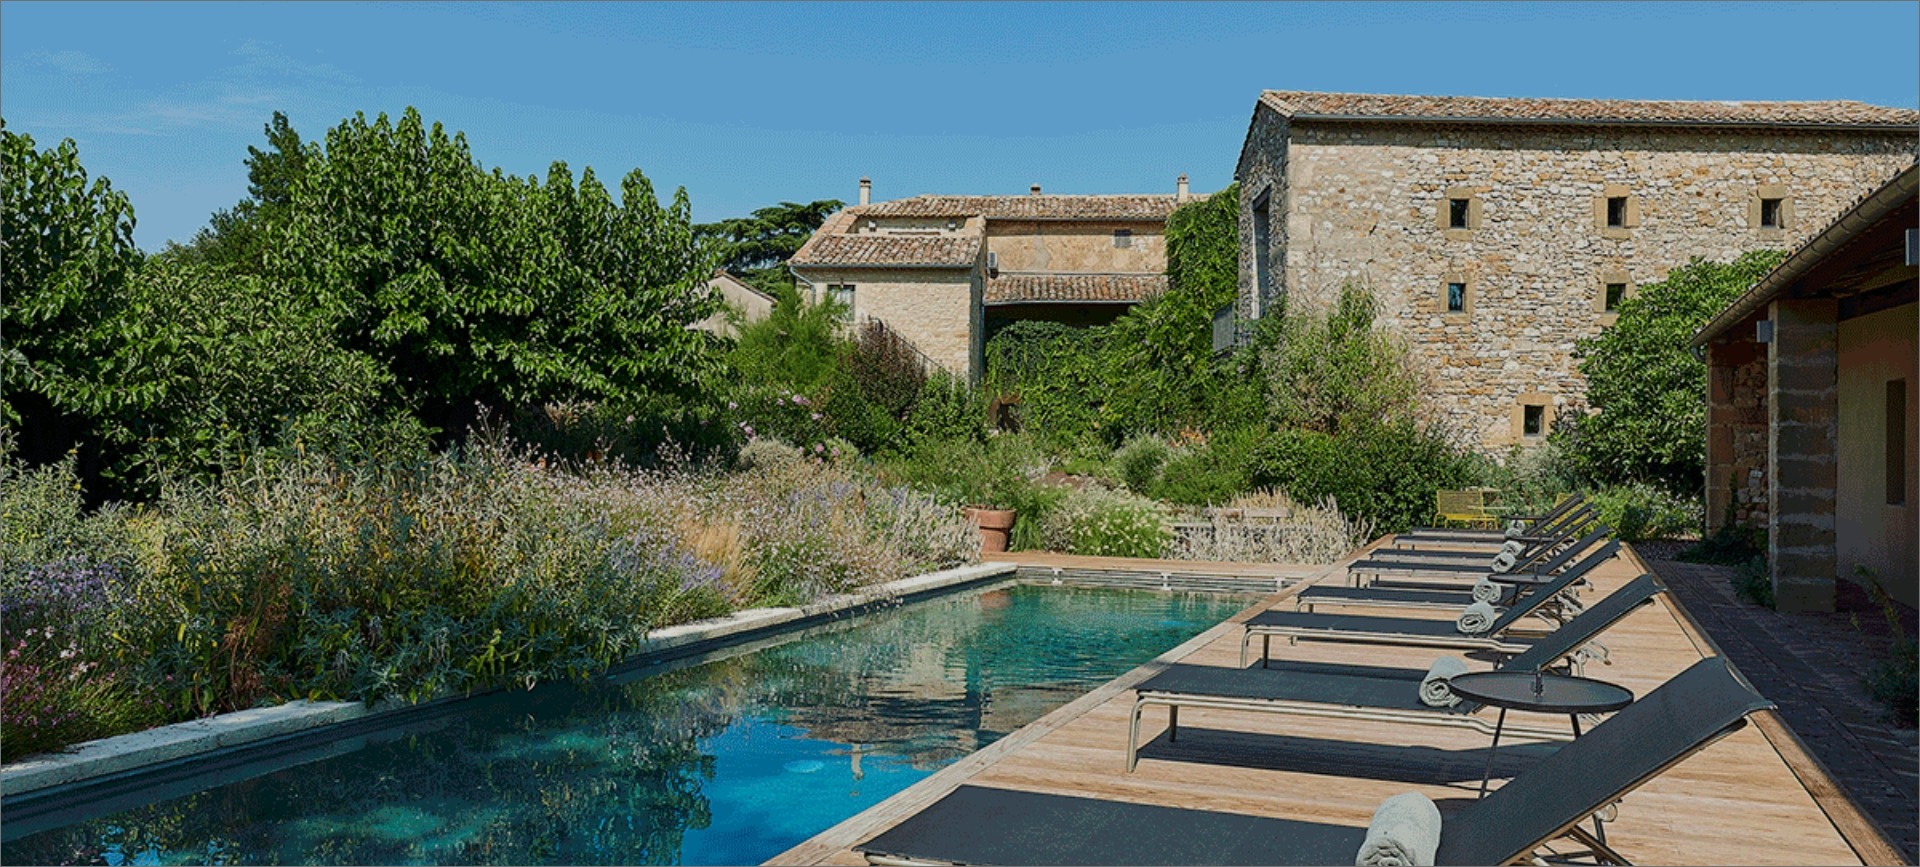 Maison d'Ulysse - Charming farmhouse in Provence